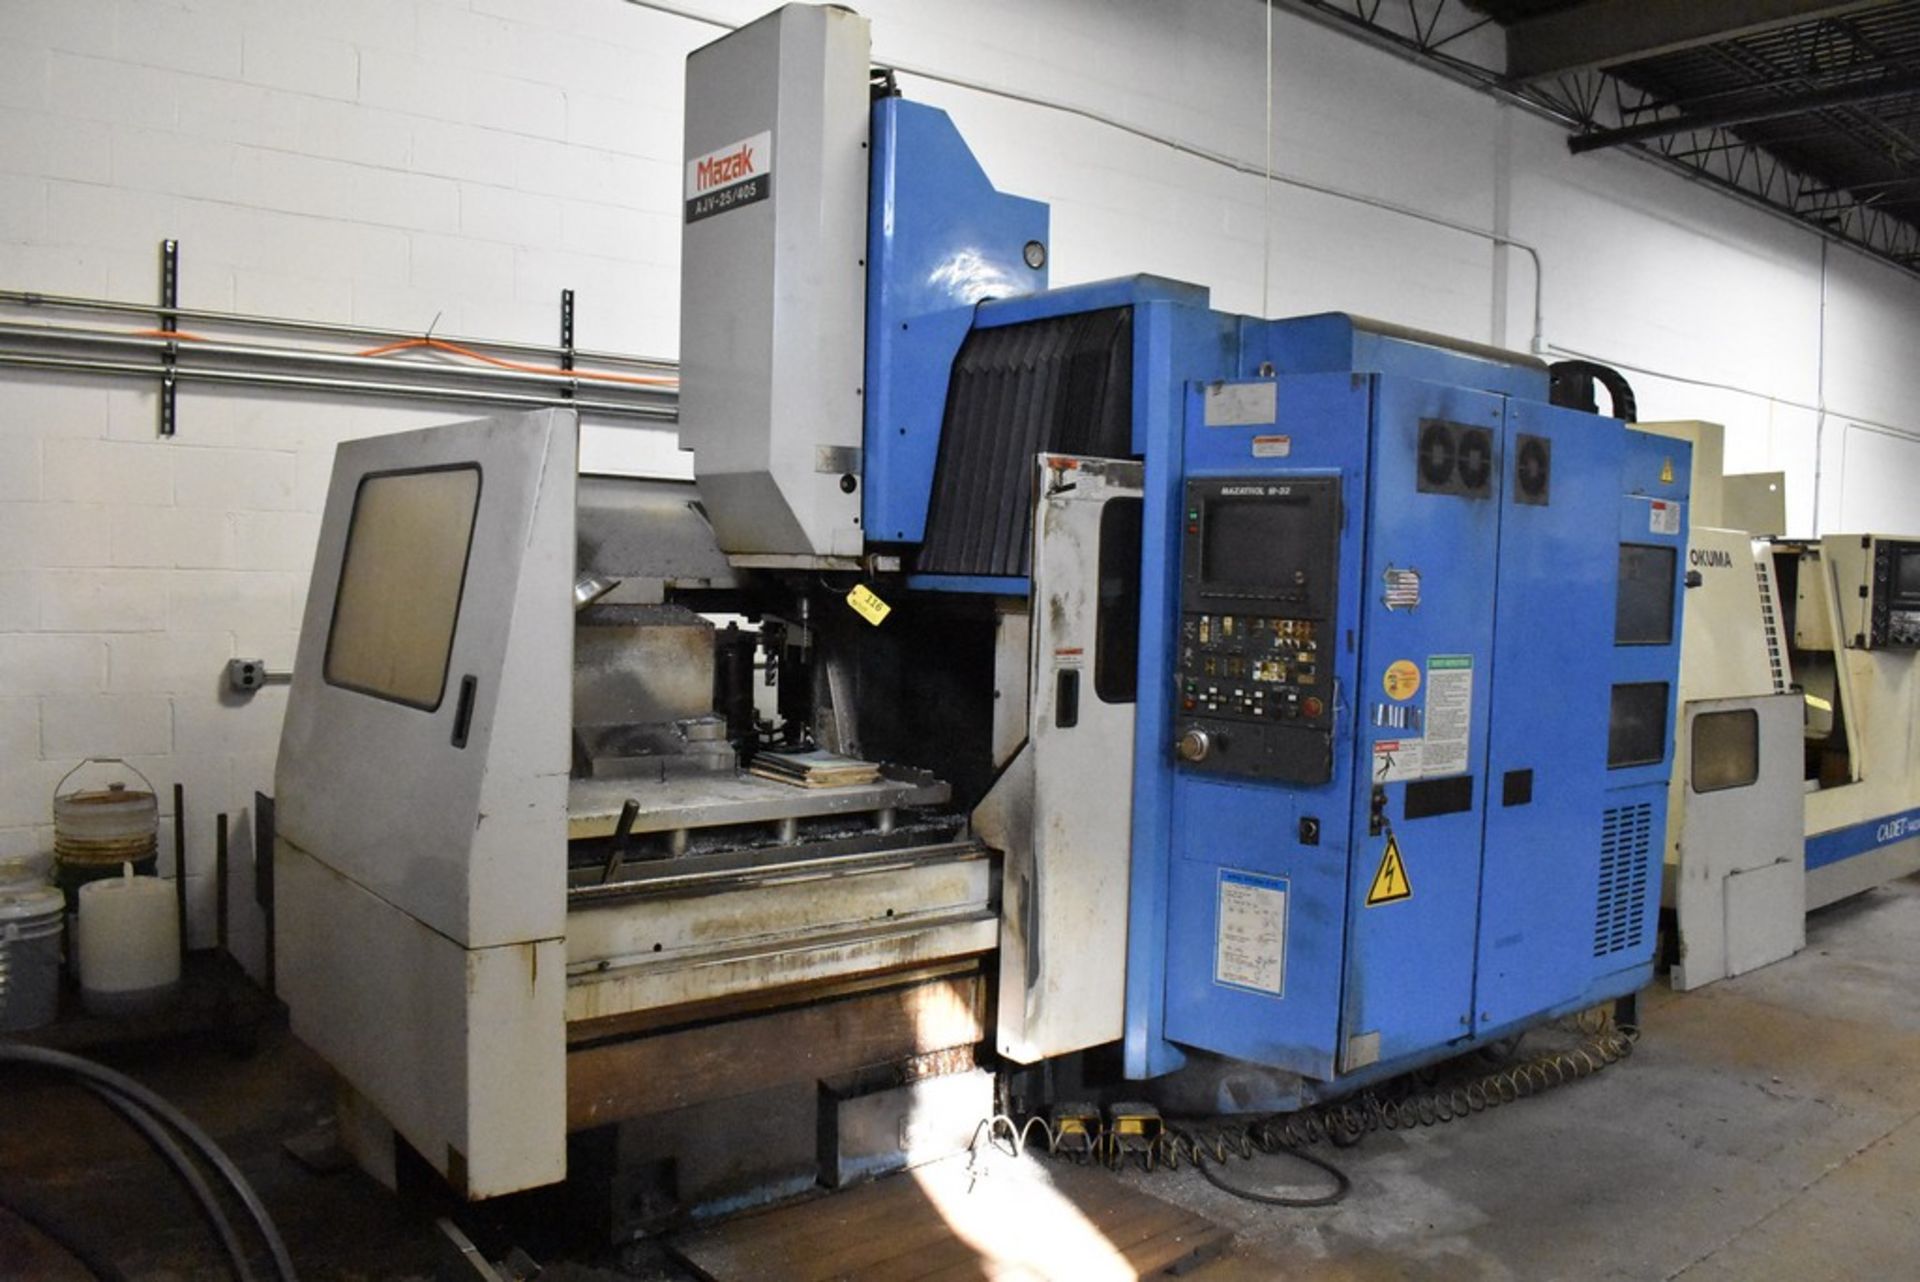 MAZAK MODEL AJV25/405 CNC VERTICAL MACHINING CENTER, S/N 77005, 39.4" X-AXIS TRAVEL, 20" Y-AXIS - Image 2 of 10